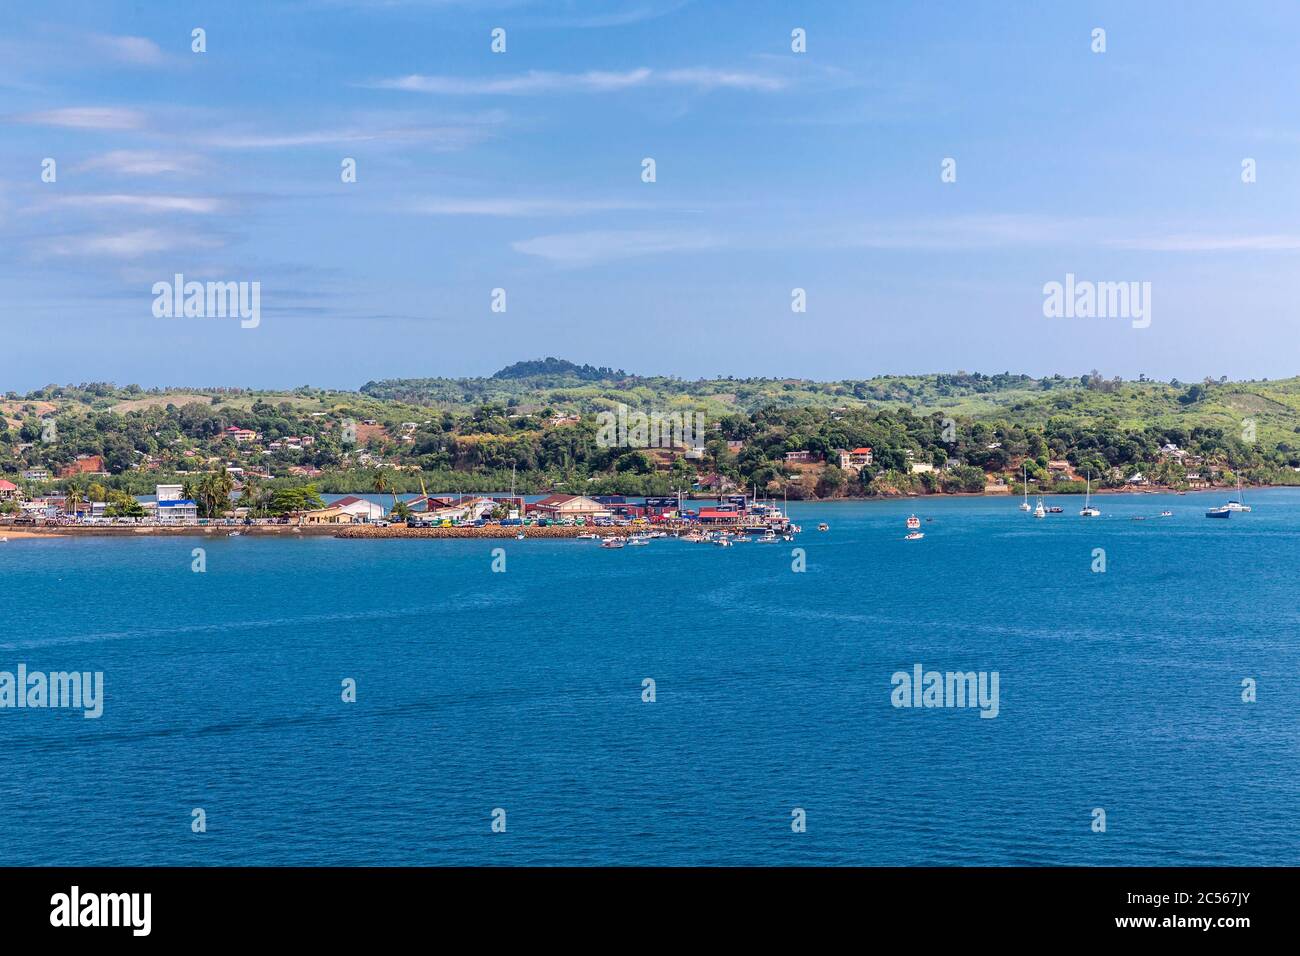 View from the cruise ship onto the ferry terminal, Andoany, Hell-Ville, Nosy Bé, Madagascar, Africa, Indian Ocean Stock Photo